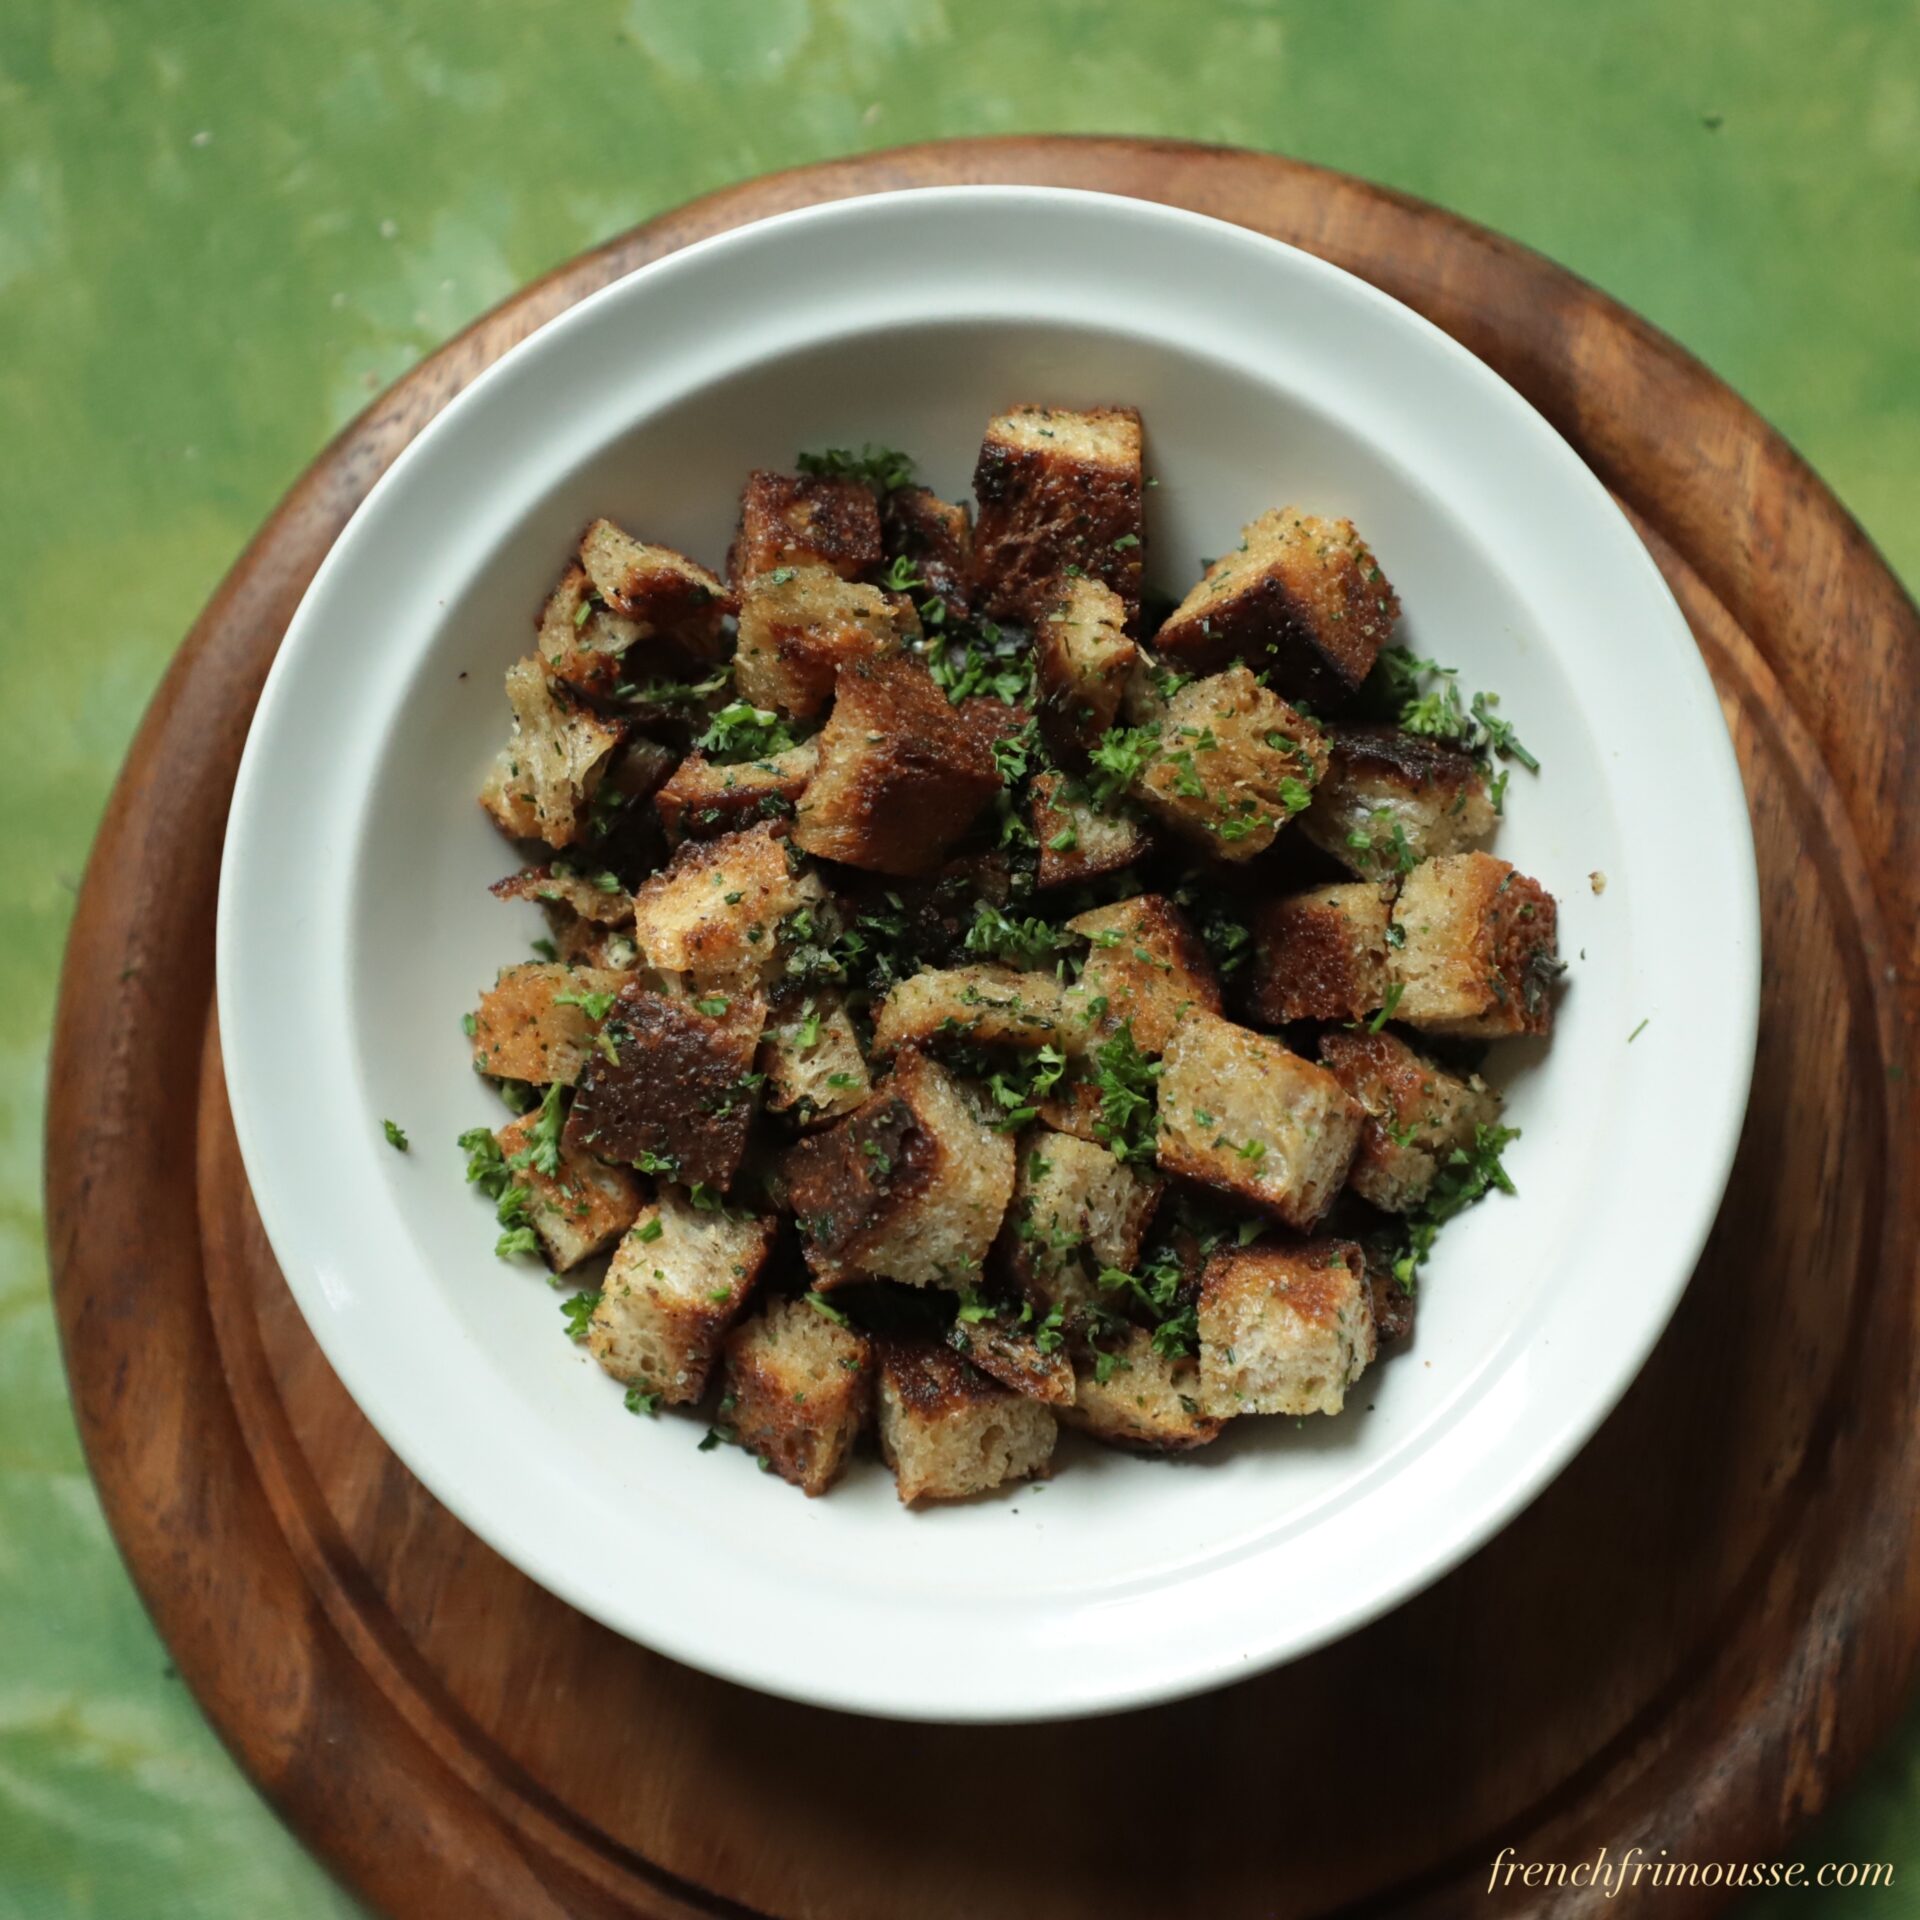 Top view of a while bowl filled with toasted bread cubes speckled with herbs.